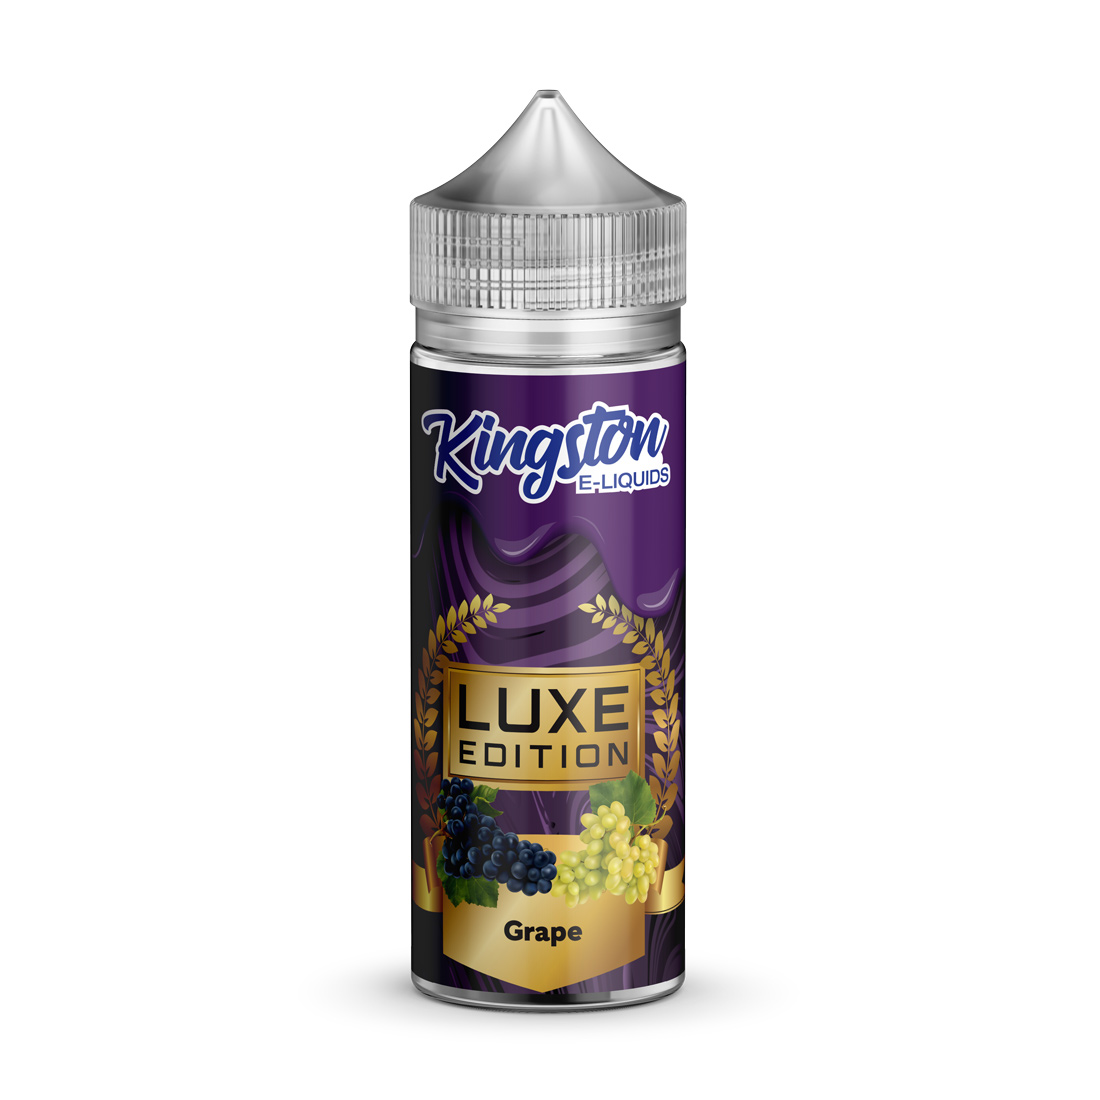 Grape by Kingston Luxe Edition 100ml